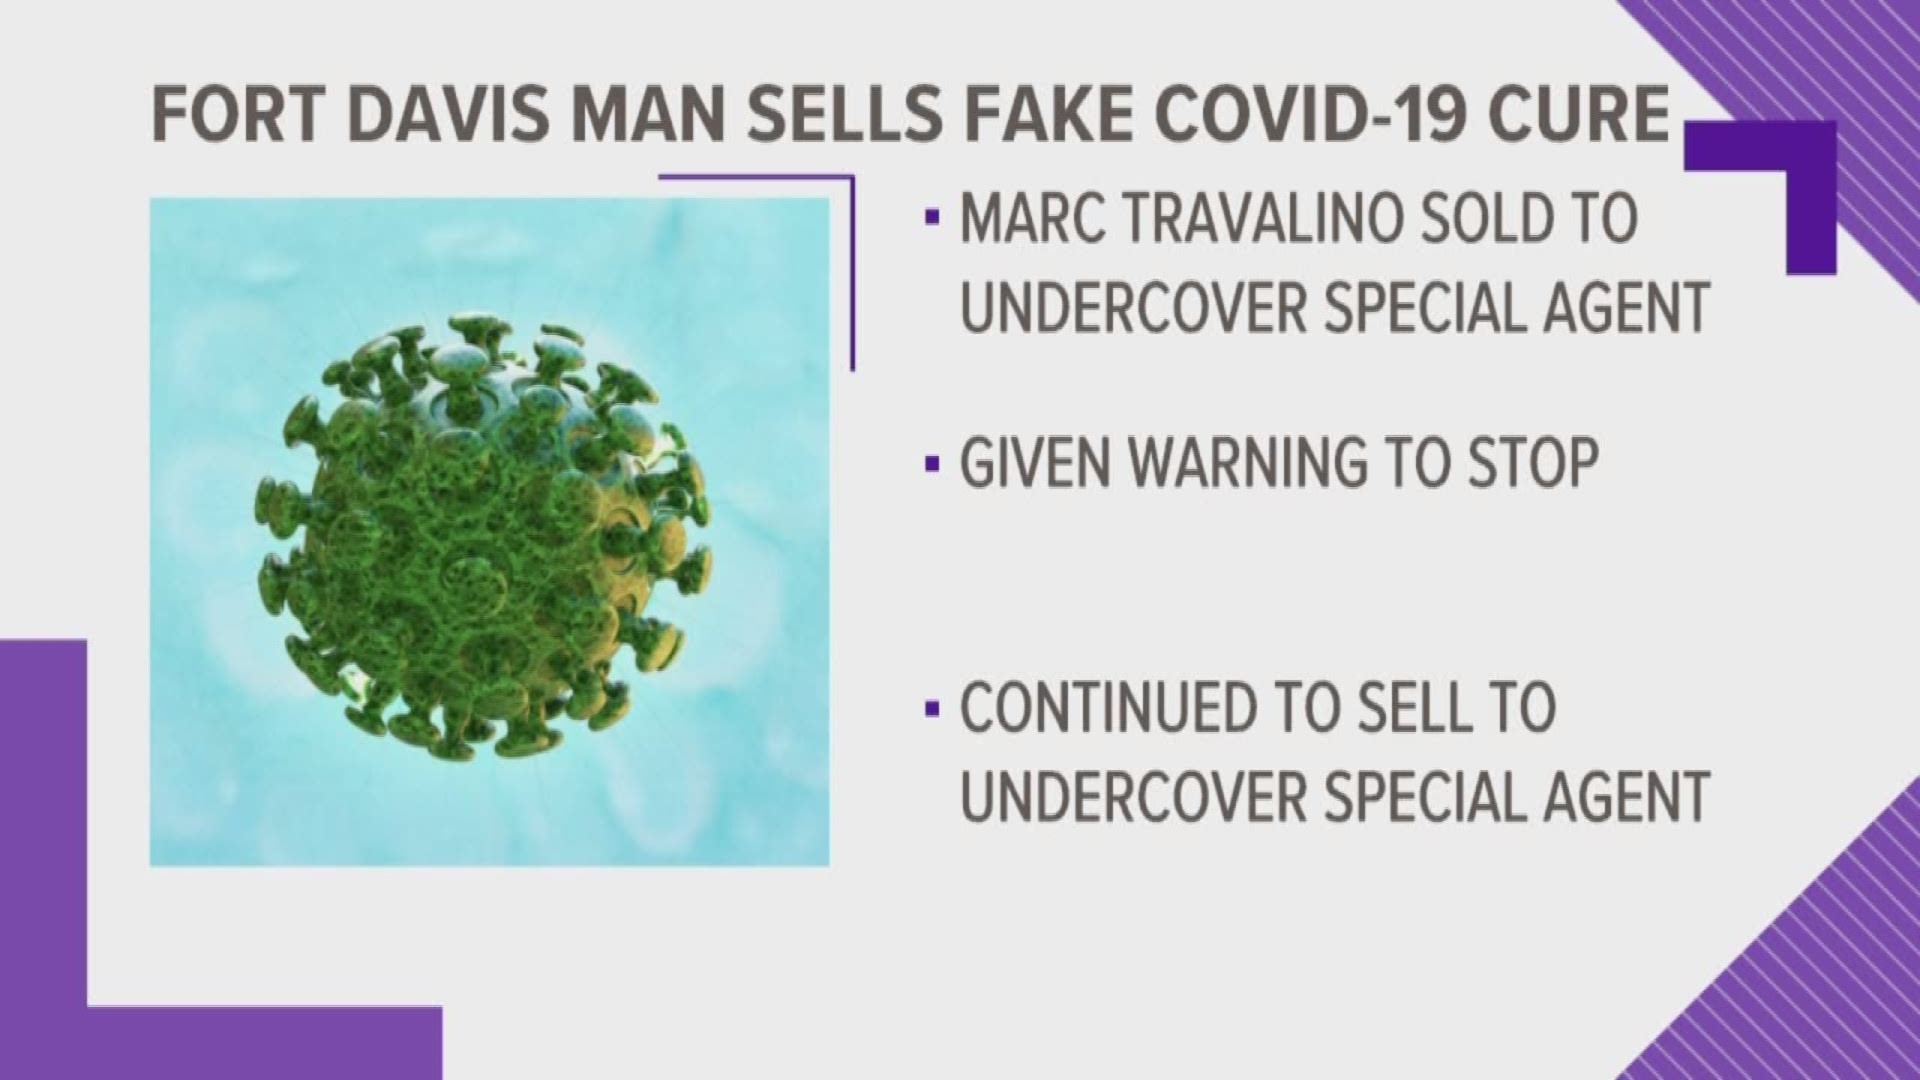 The man sold the supposed cure to an undercover agent. A week after receiving a cease and desist letter, he sold it to another undercover agent.